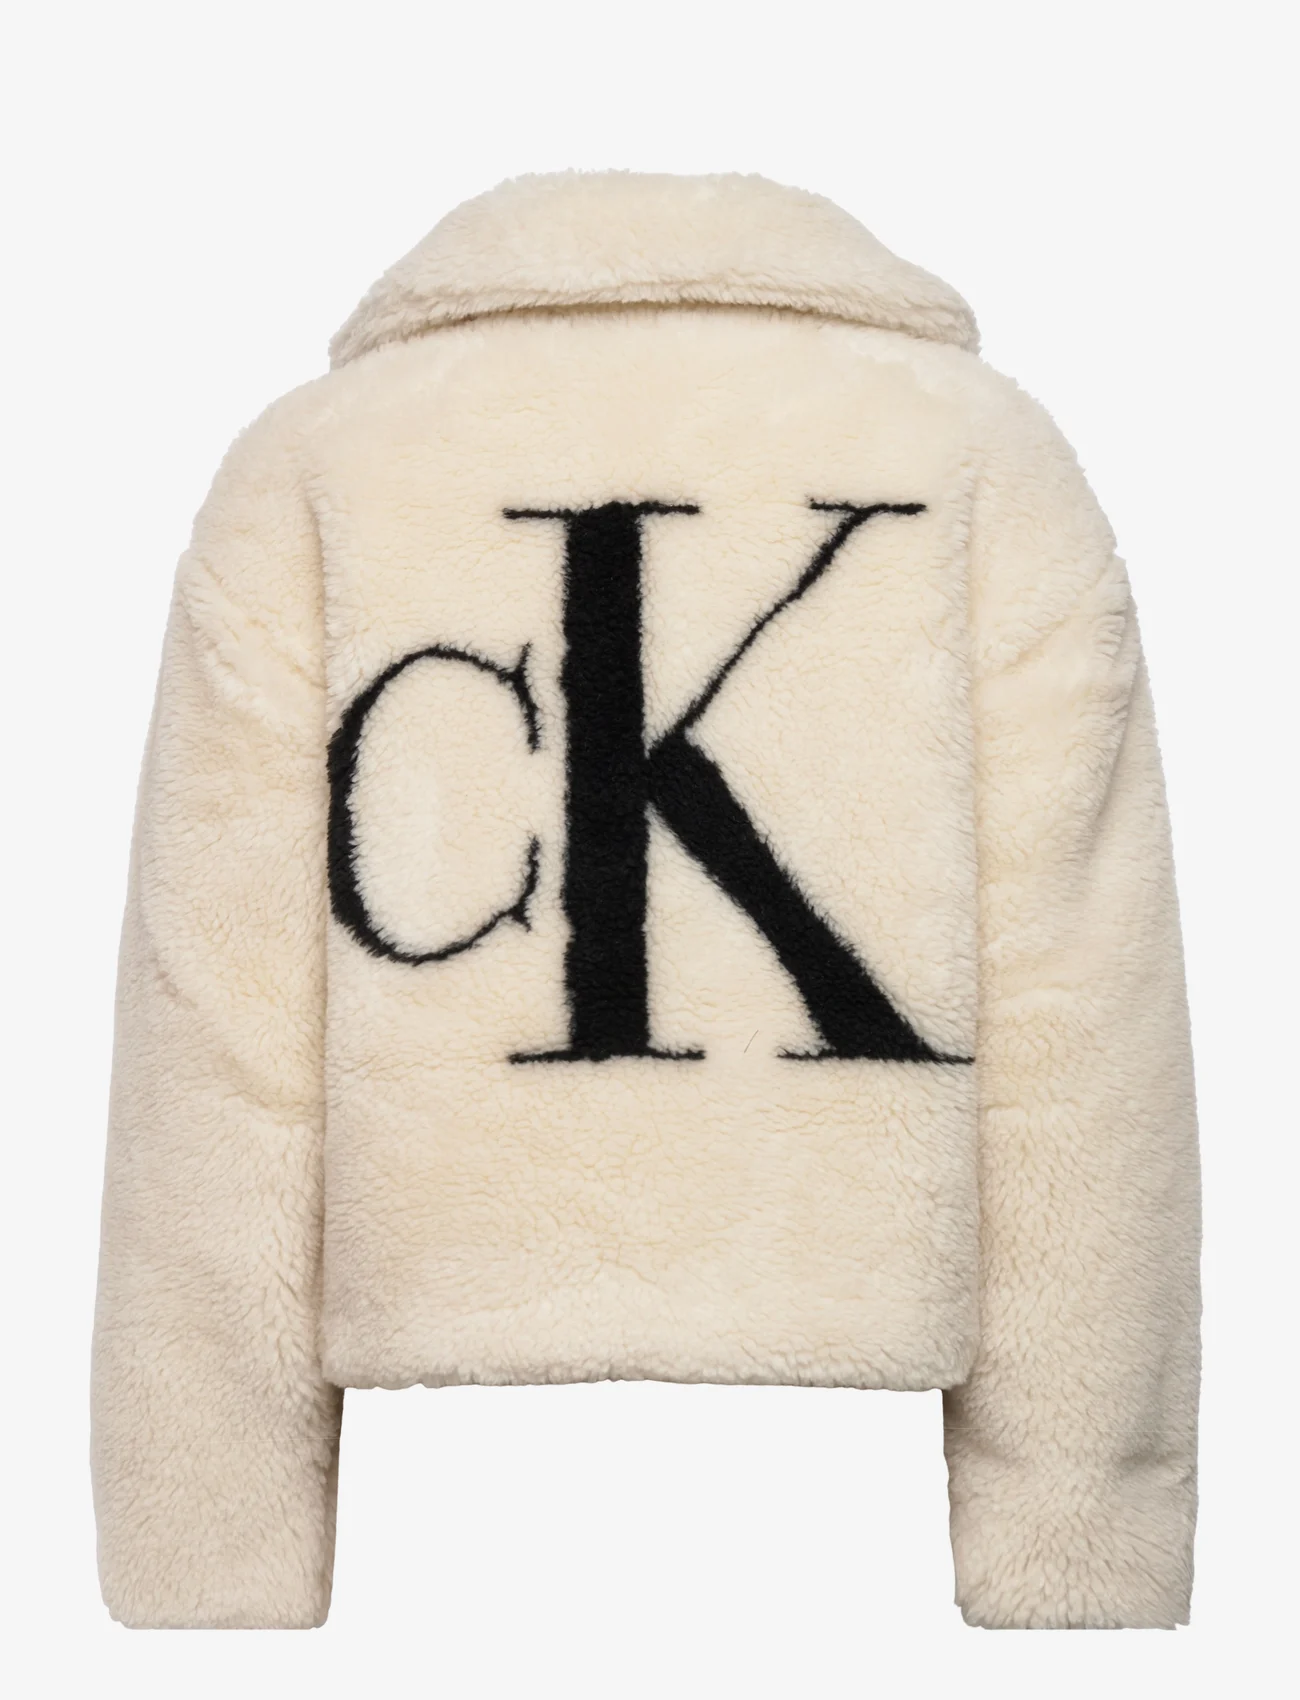 Calvin Klein Jeans Back Ck Sherpa Short Jacket  €. Buy Faux Fur  from Calvin Klein Jeans online at . Fast delivery and easy returns